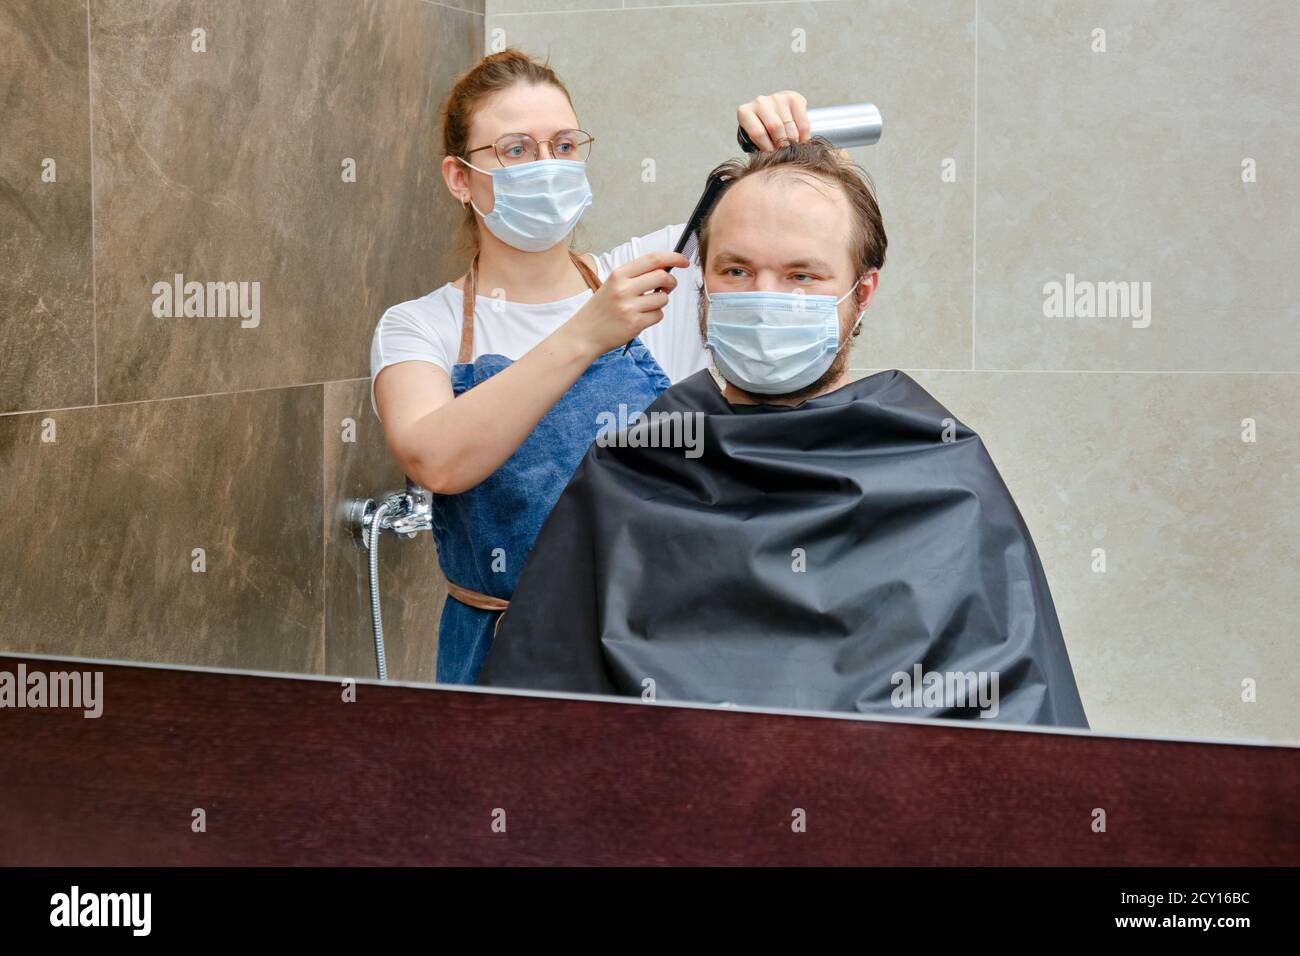 Woman in medical mask creates hairstyle for man with comb and hair spray in home bathroom, copy space. Concept of closed hairdressers and barbershops Stock Photo